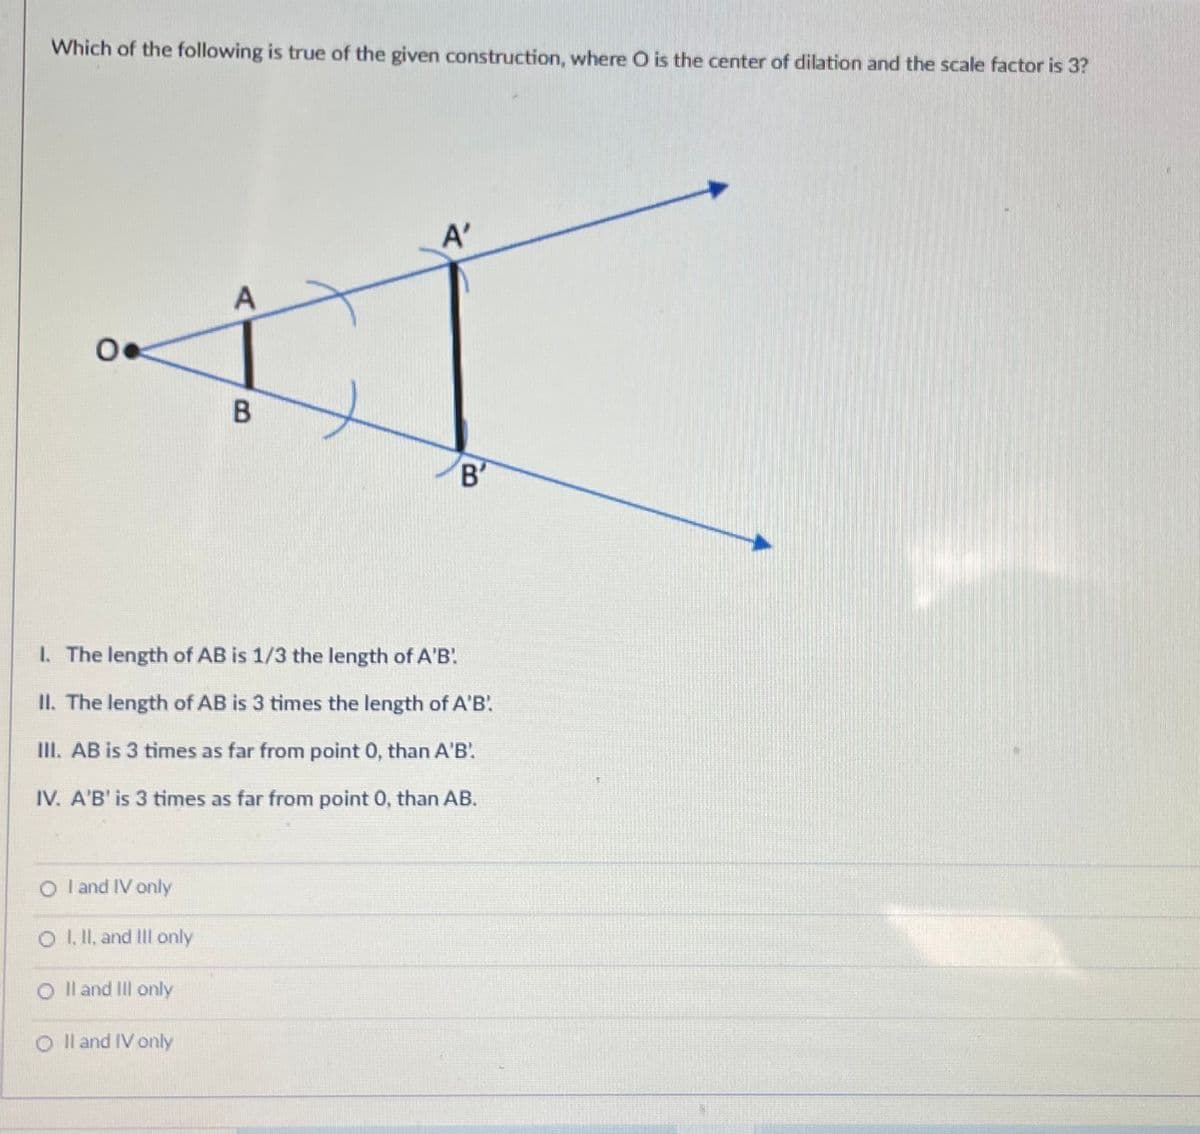 Which of the following is true of the given construction, where O is the center of dilation and the scale factor is 3?
A'
A
B'
I. The length of AB is 1/3 the length of A'B!
II. The length of AB is 3 times the length of A'B.
III. AB is 3 times as far from point 0, than A'B'.
IV. A'B' is 3 times as far from point 0, than AB.
O l and IV only
O I. I, and II only
O Il and Il only
O Il and IV only
